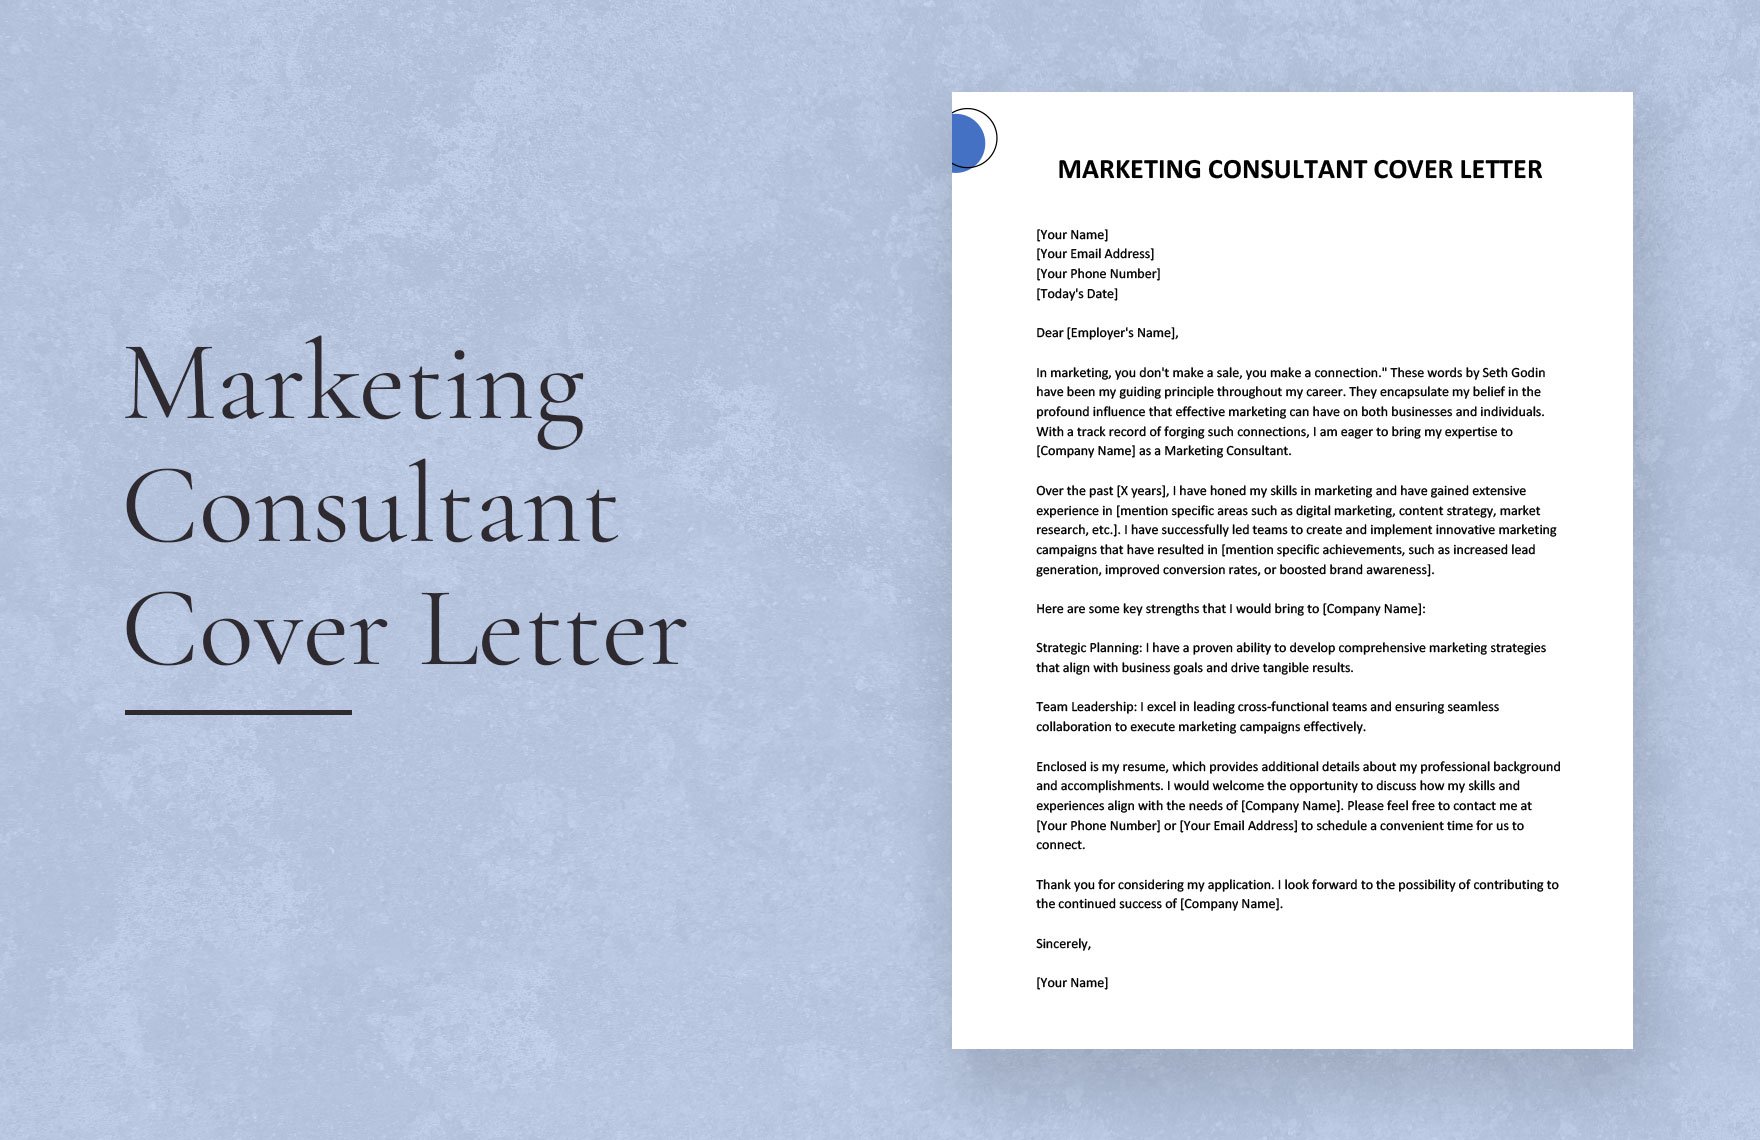 Marketing Consultant Cover Letter